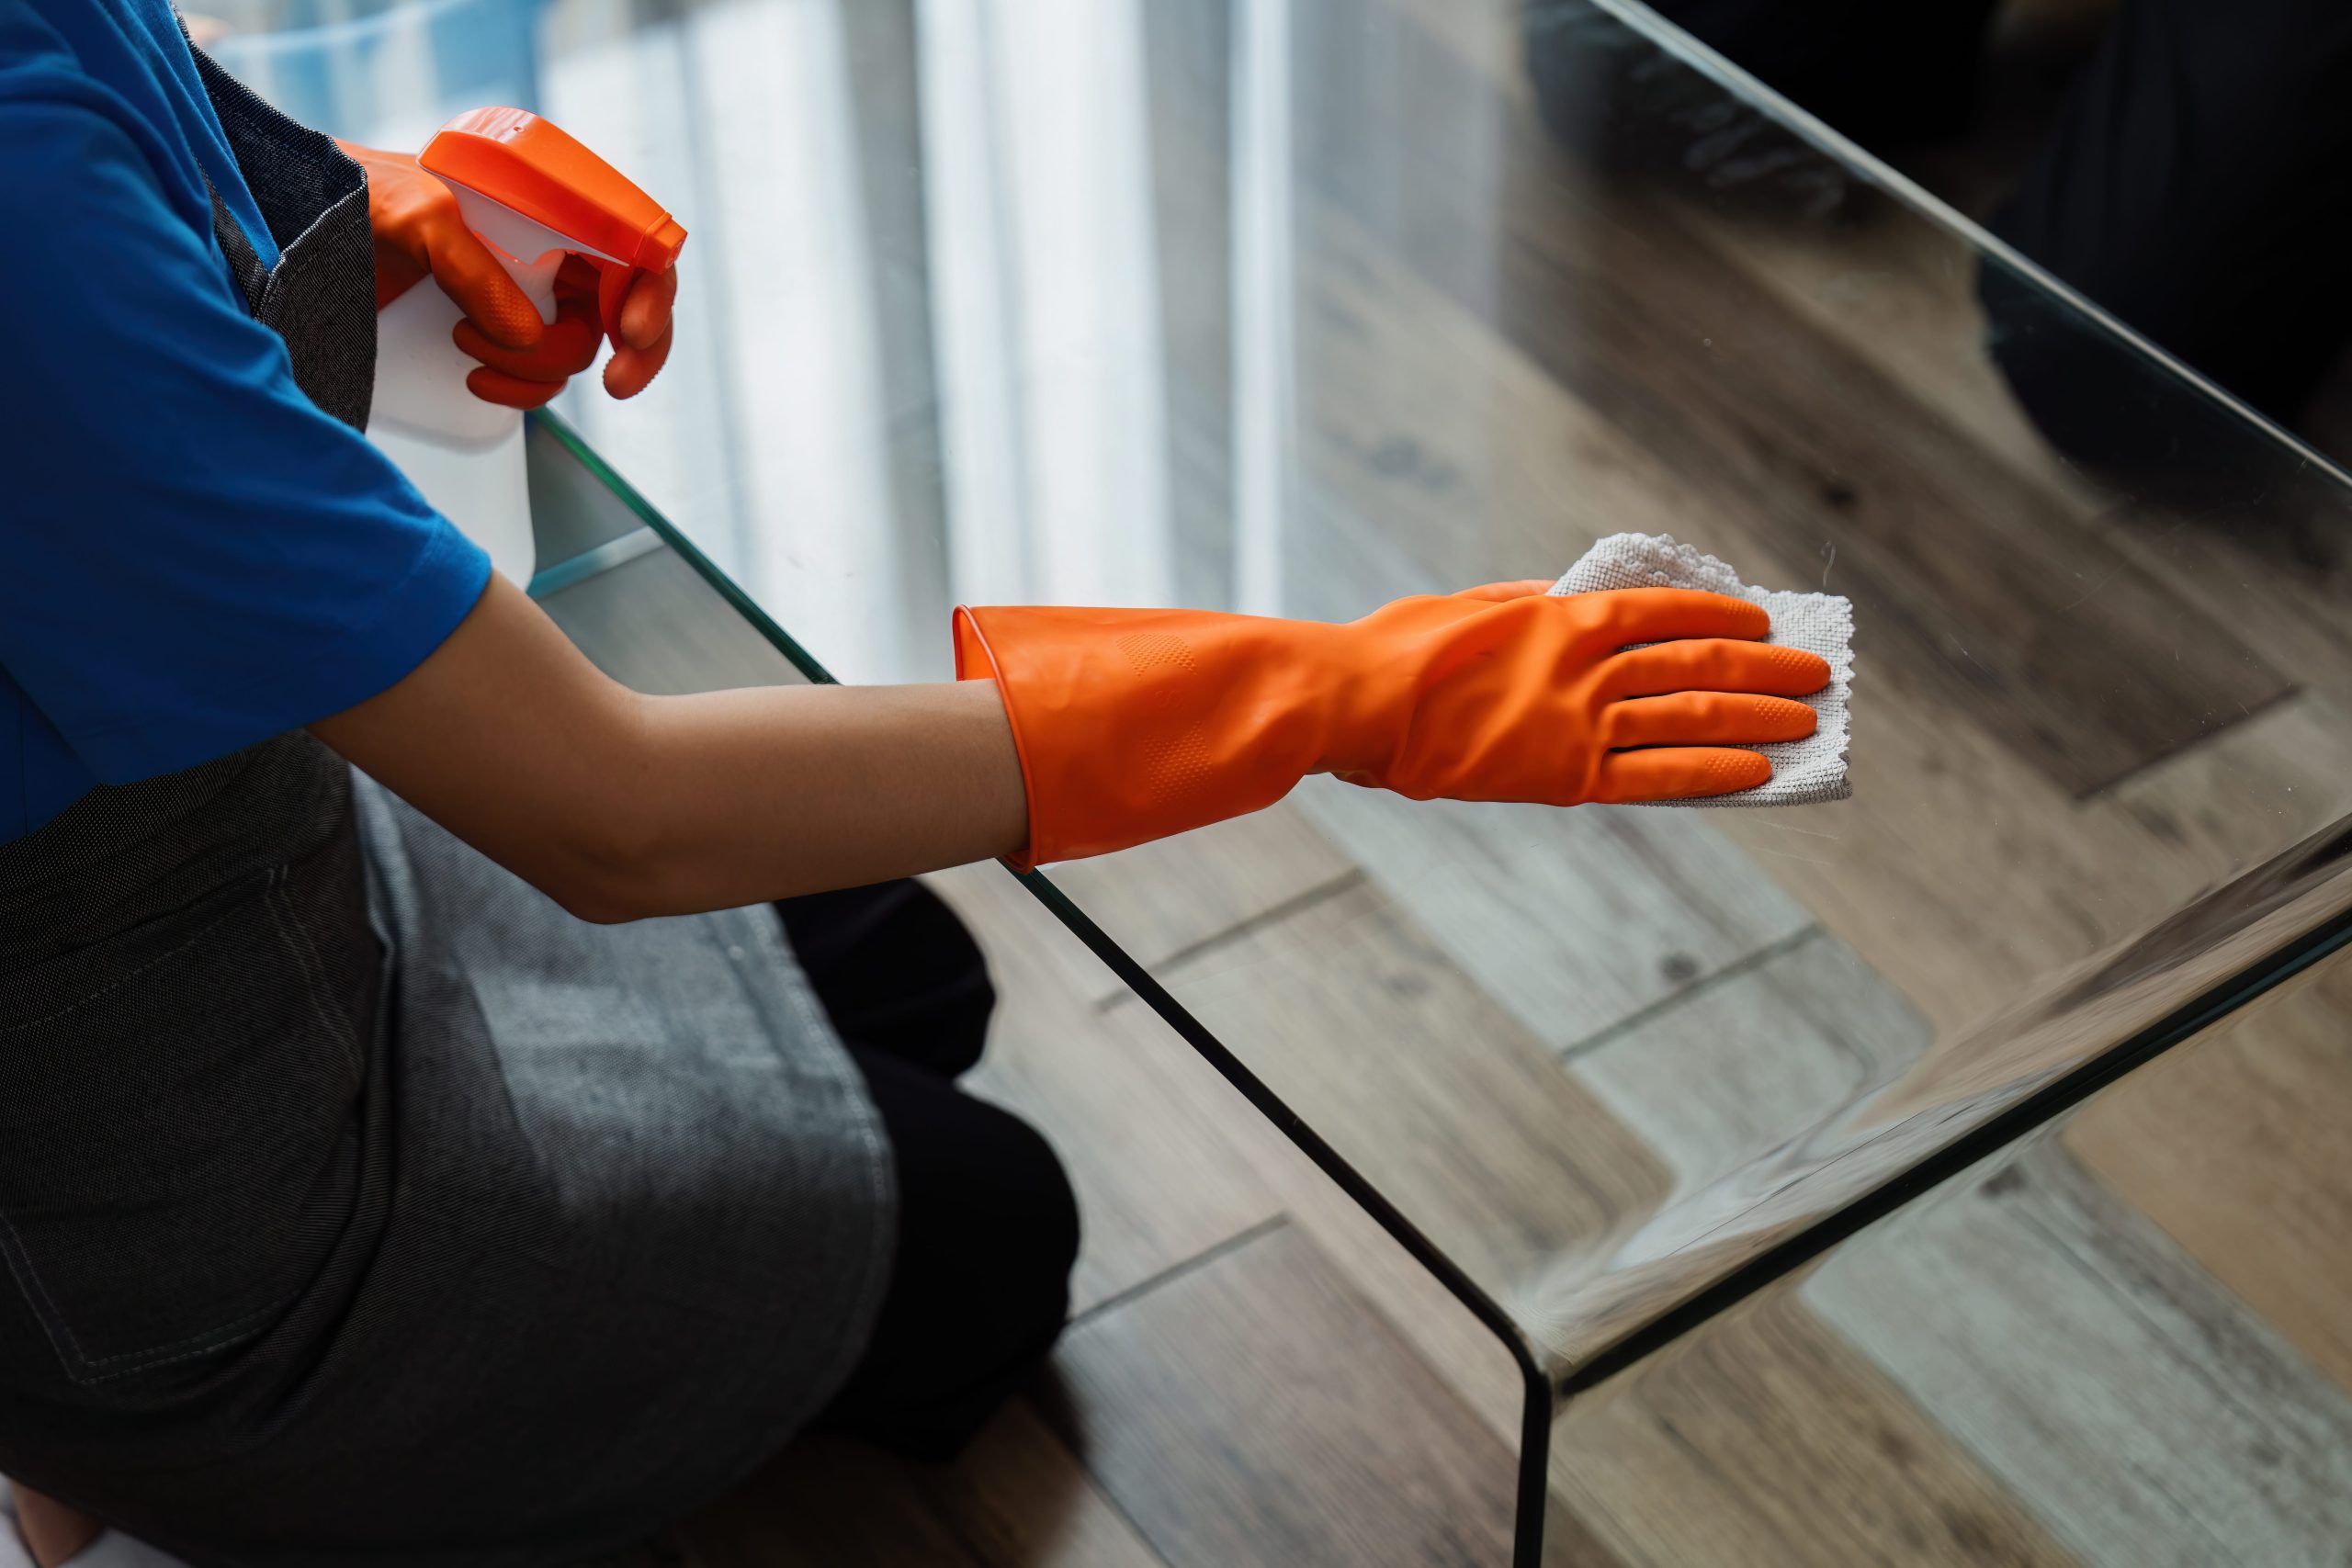 New NJ law requires more protections for domestic workers [Video]